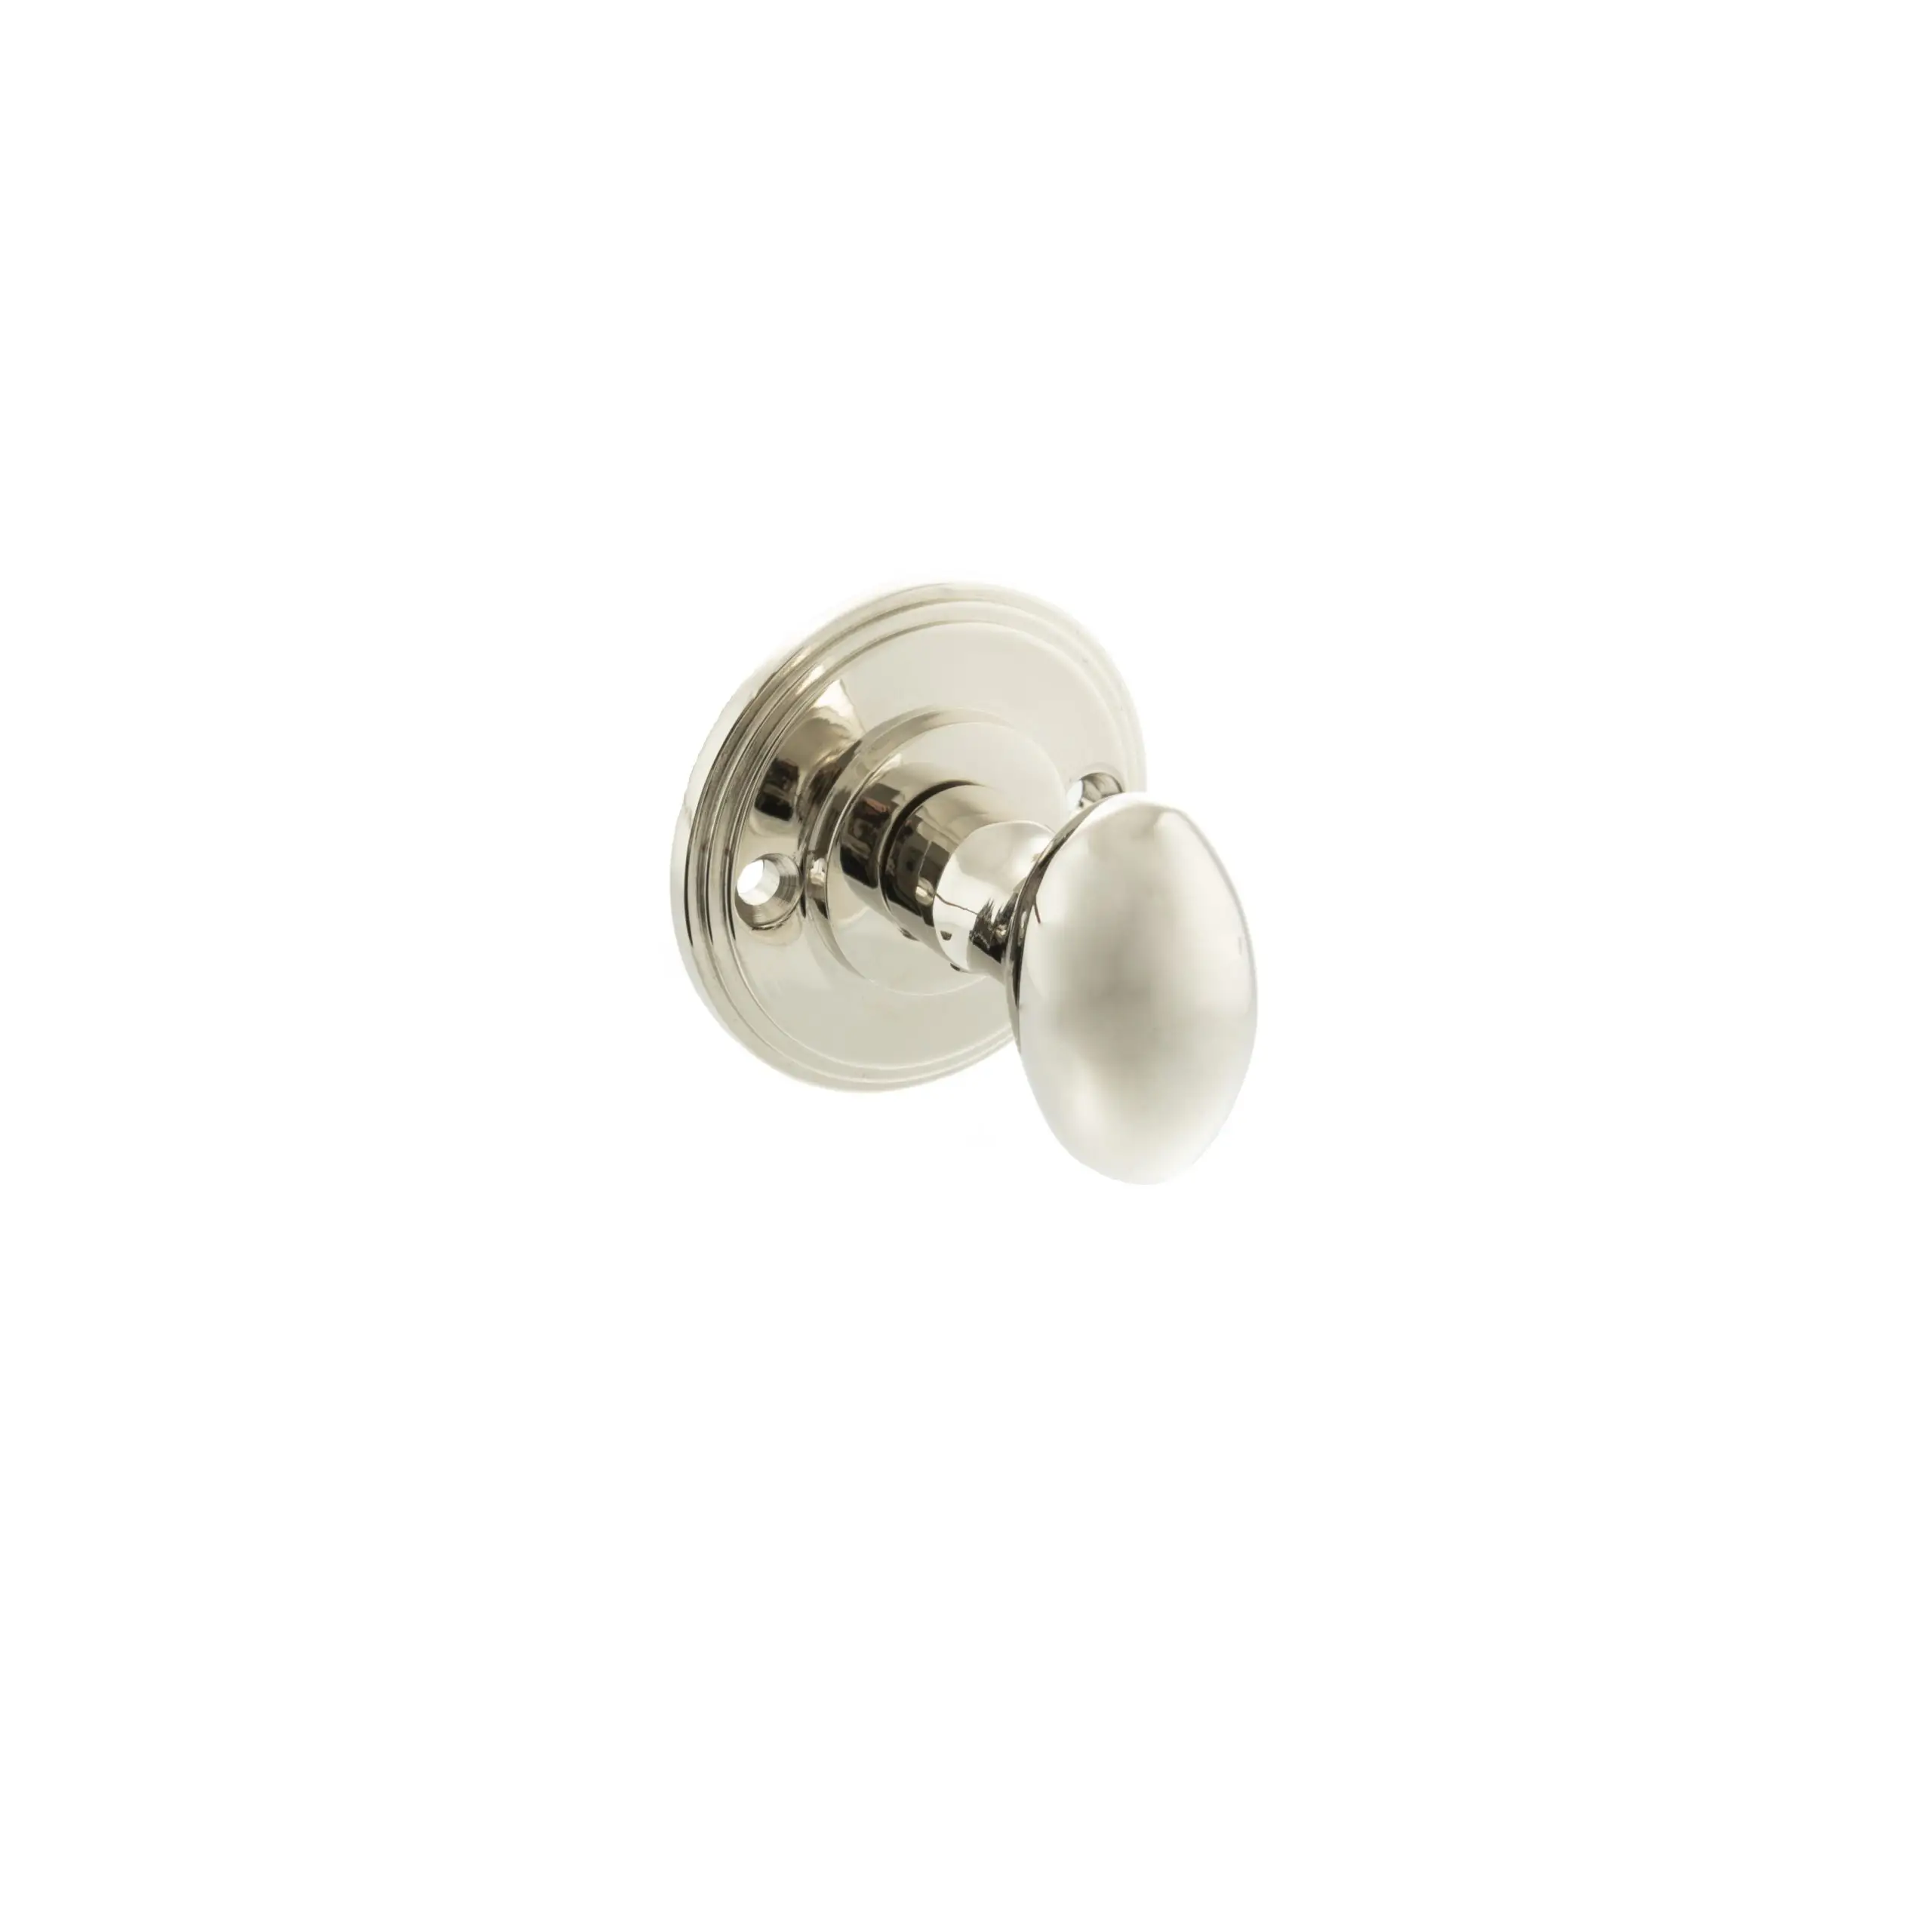 MHOWCPN_MILLHOUSE-BRASS-WC-TURN-TO-SUIT-MORTICE-KNOBS_POLISHED-NICKEL_1_HR-scaled.jpg